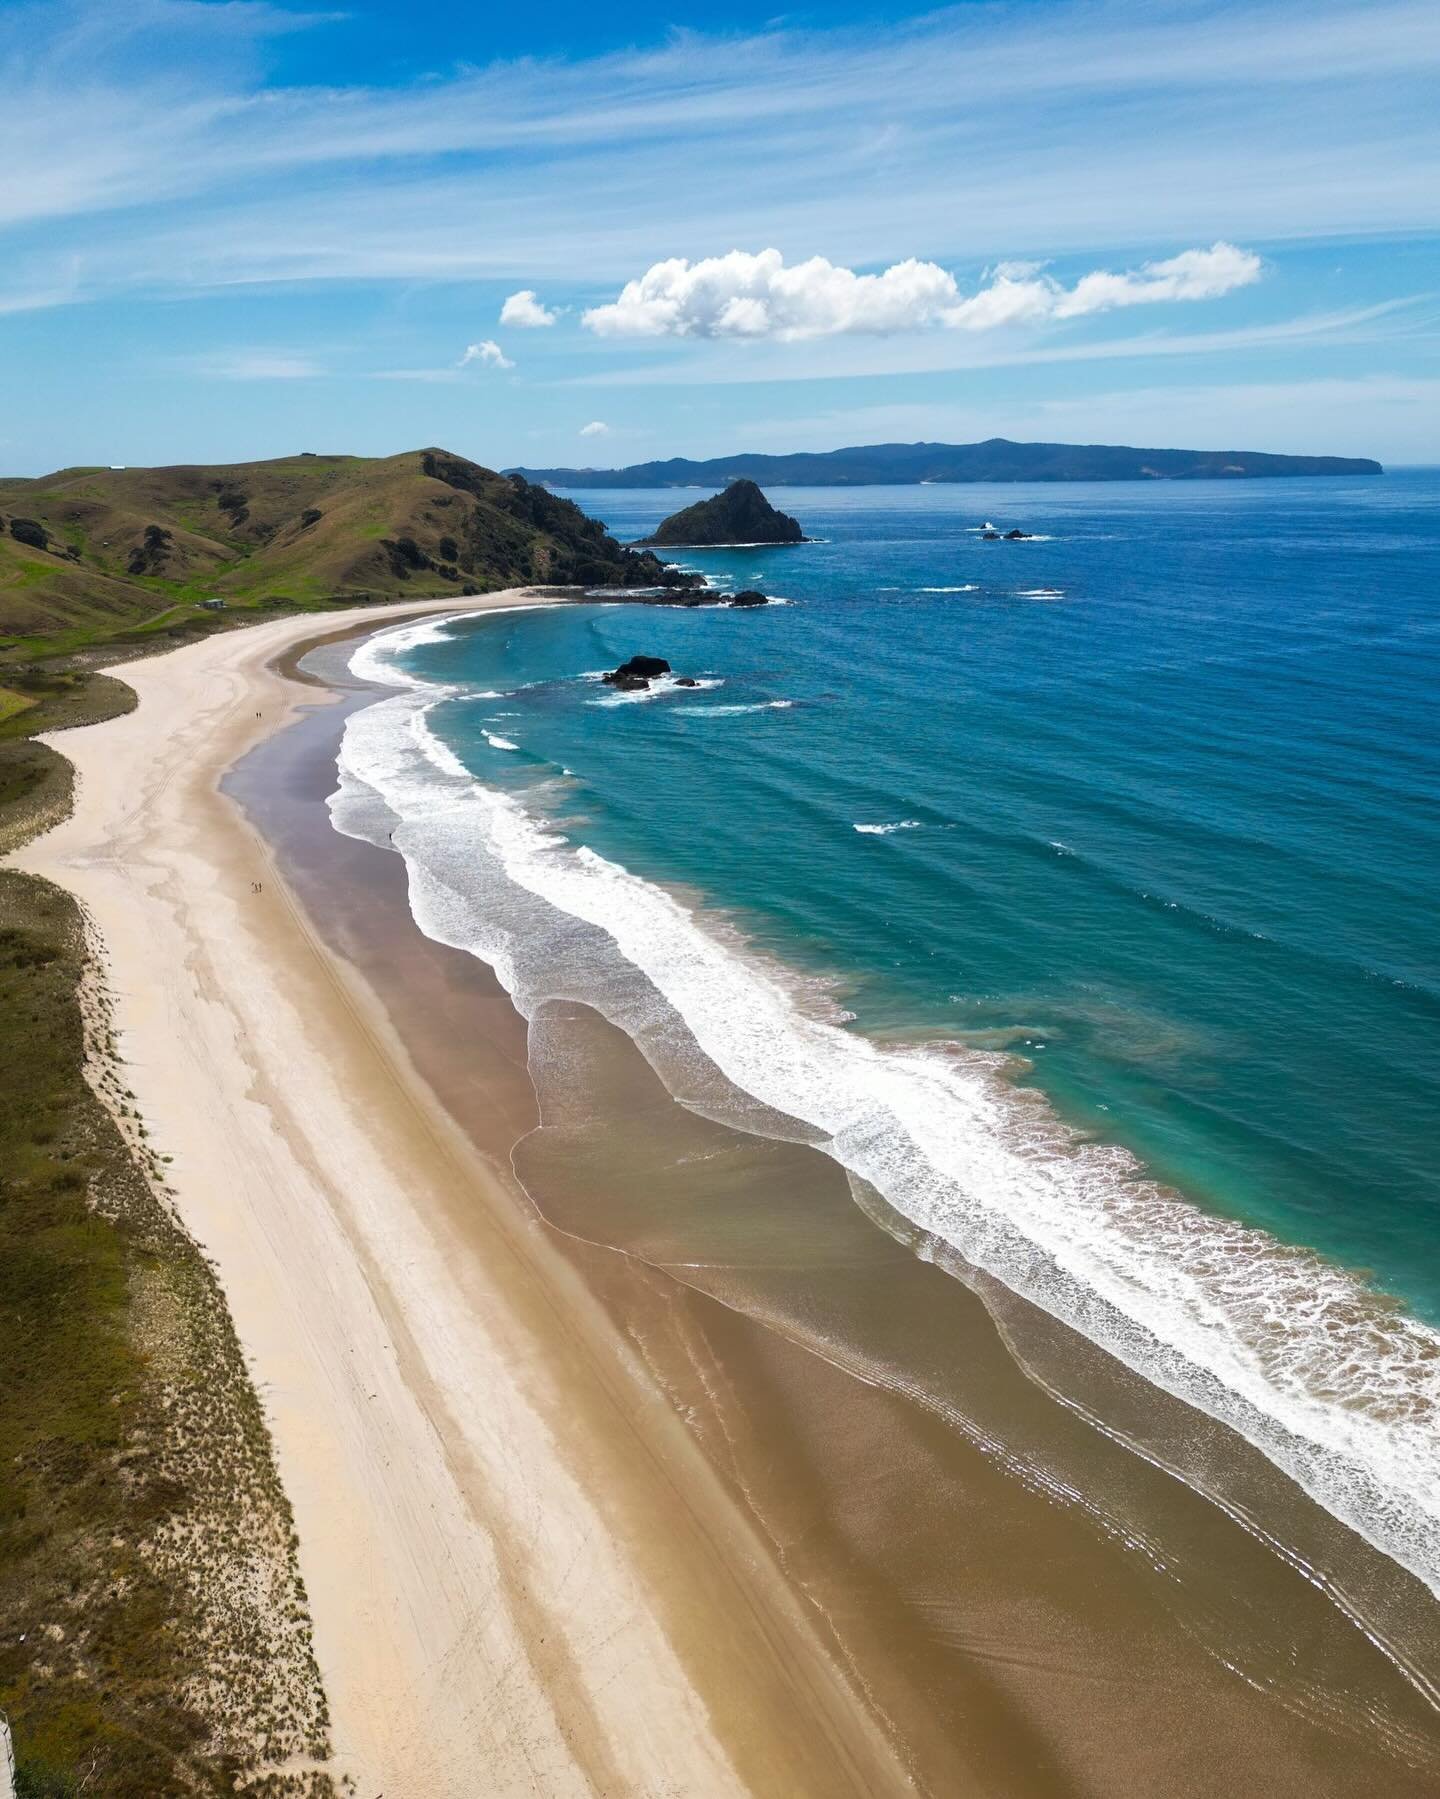 If you don&rsquo;t know it, this is one of the gems on the Coromandel. Opito Bay.  It&rsquo;s stunning remote and jaw droppingly beautiful. With above average sunshine hours this special micro climate is perfect for making sea salt. The water is pure